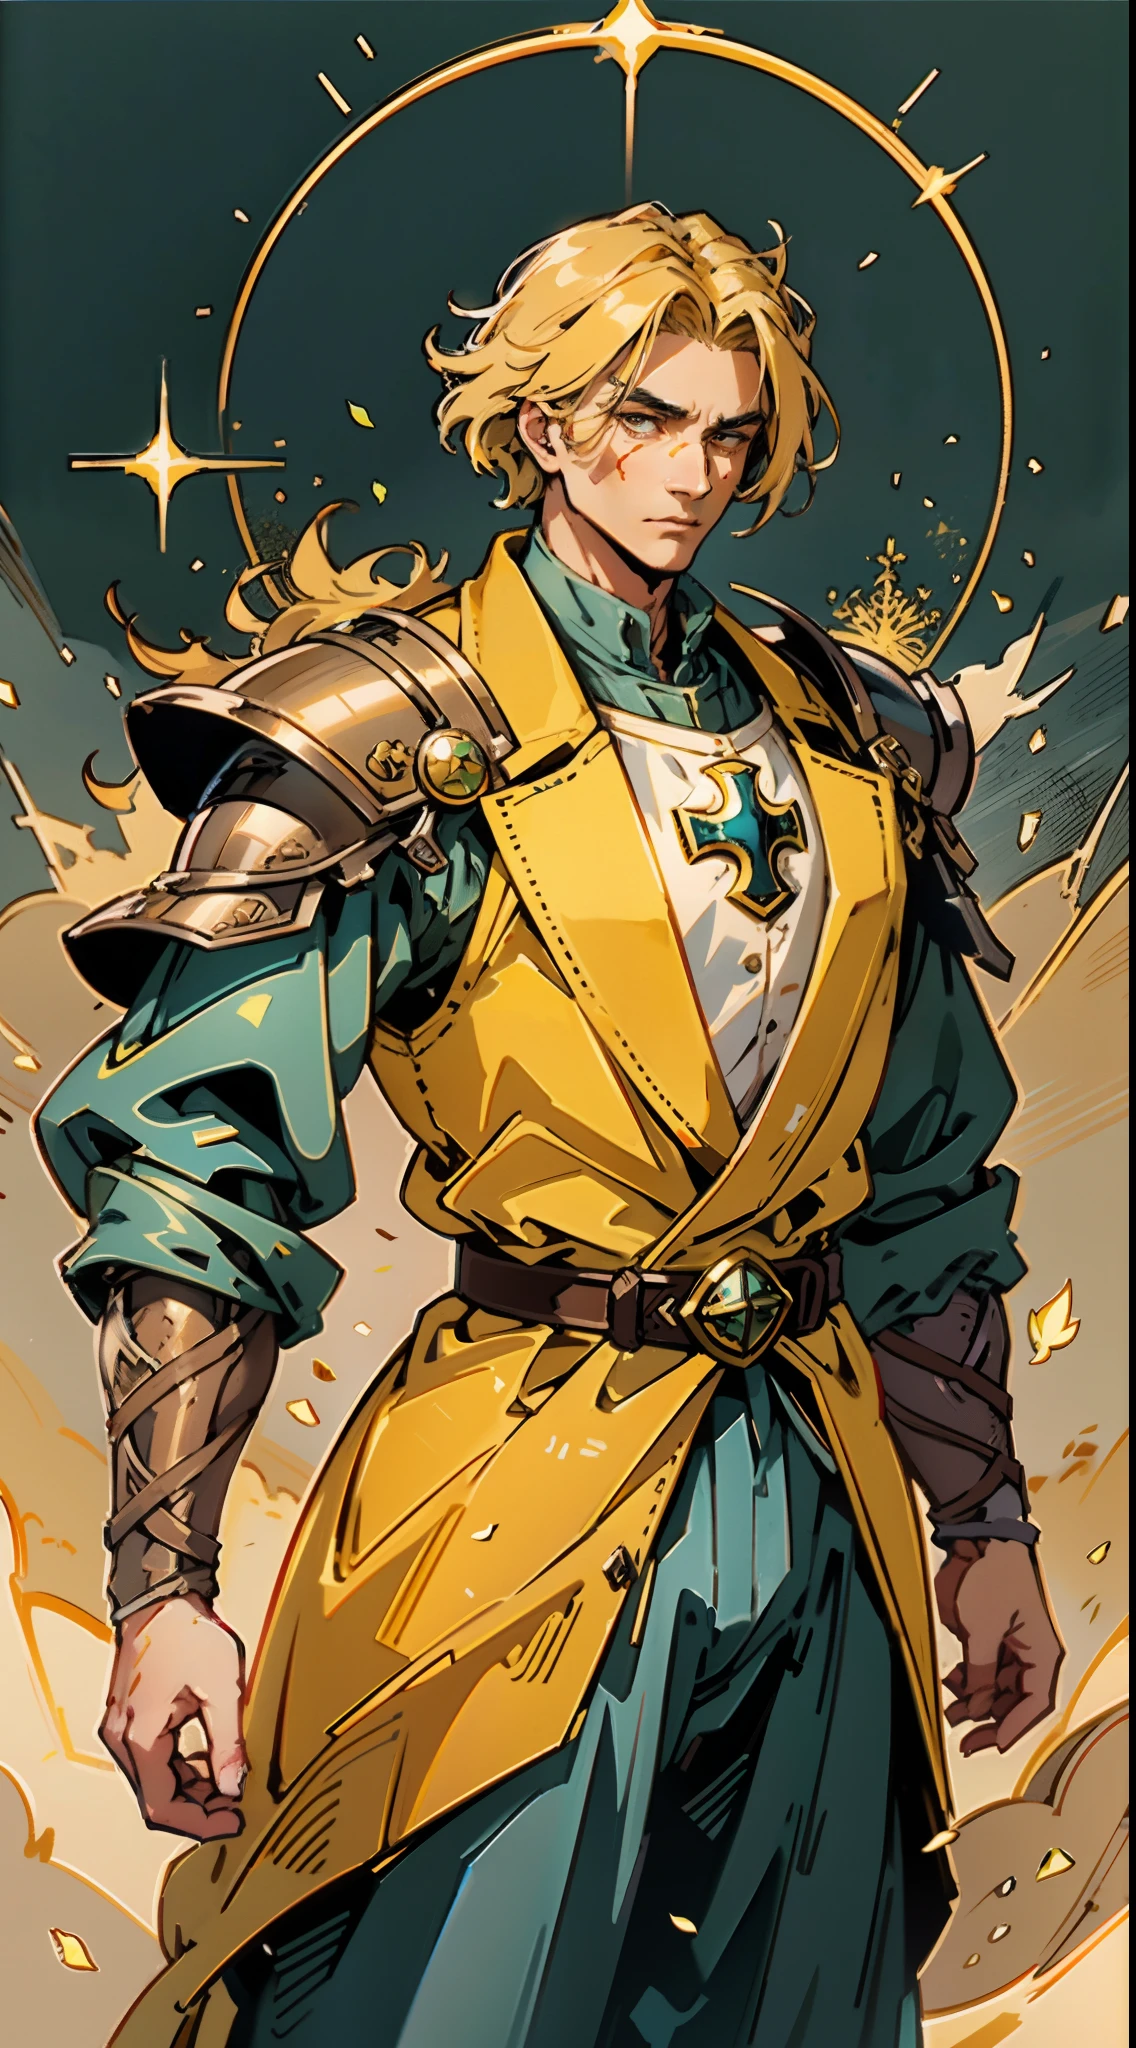 A middle-aged man with short golden hair, thick hair, a large cross scar on his face, has gentle eyes, a calm expression, a fantasy-style coat with leaf-shaped chest armor, the color scheme is mainly grass green, with earthy yellow as secondary colors, a belt around his waist, coarse cloth trousers, the background shows a medieval fantasy-style street with snowflakes falling, this character embodies a finely crafted fantasy-style soldier in anime style, characterized by an exquisite and mature manga illustration art style, high definition, best quality, highres, ultra-detailed, ultra-fine painting, extremely delicate, professional, anatomically correct, symmetrical face, extremely detailed eyes and face, high quality eyes, creativity, RAW photo, UHD, 8k, Natural light, cinematic lighting, masterpiece-anatomy-perfect, masterpiece:1.5